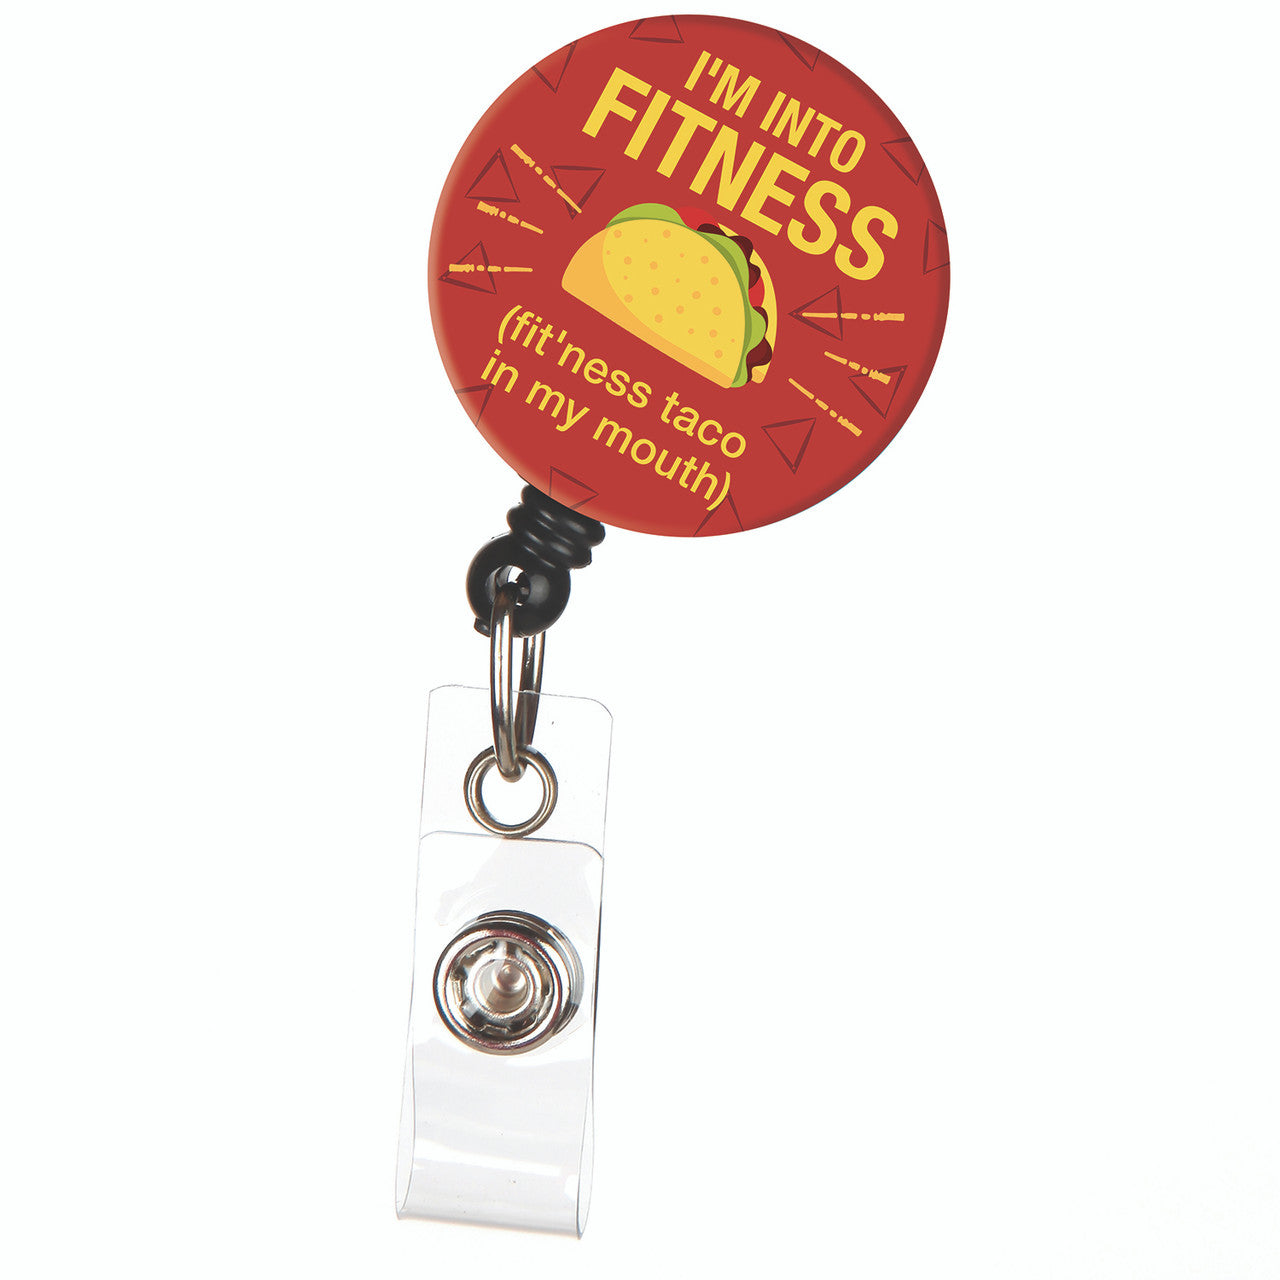 I'm Into Fit'ness Taco In My Mouth Badge Reel